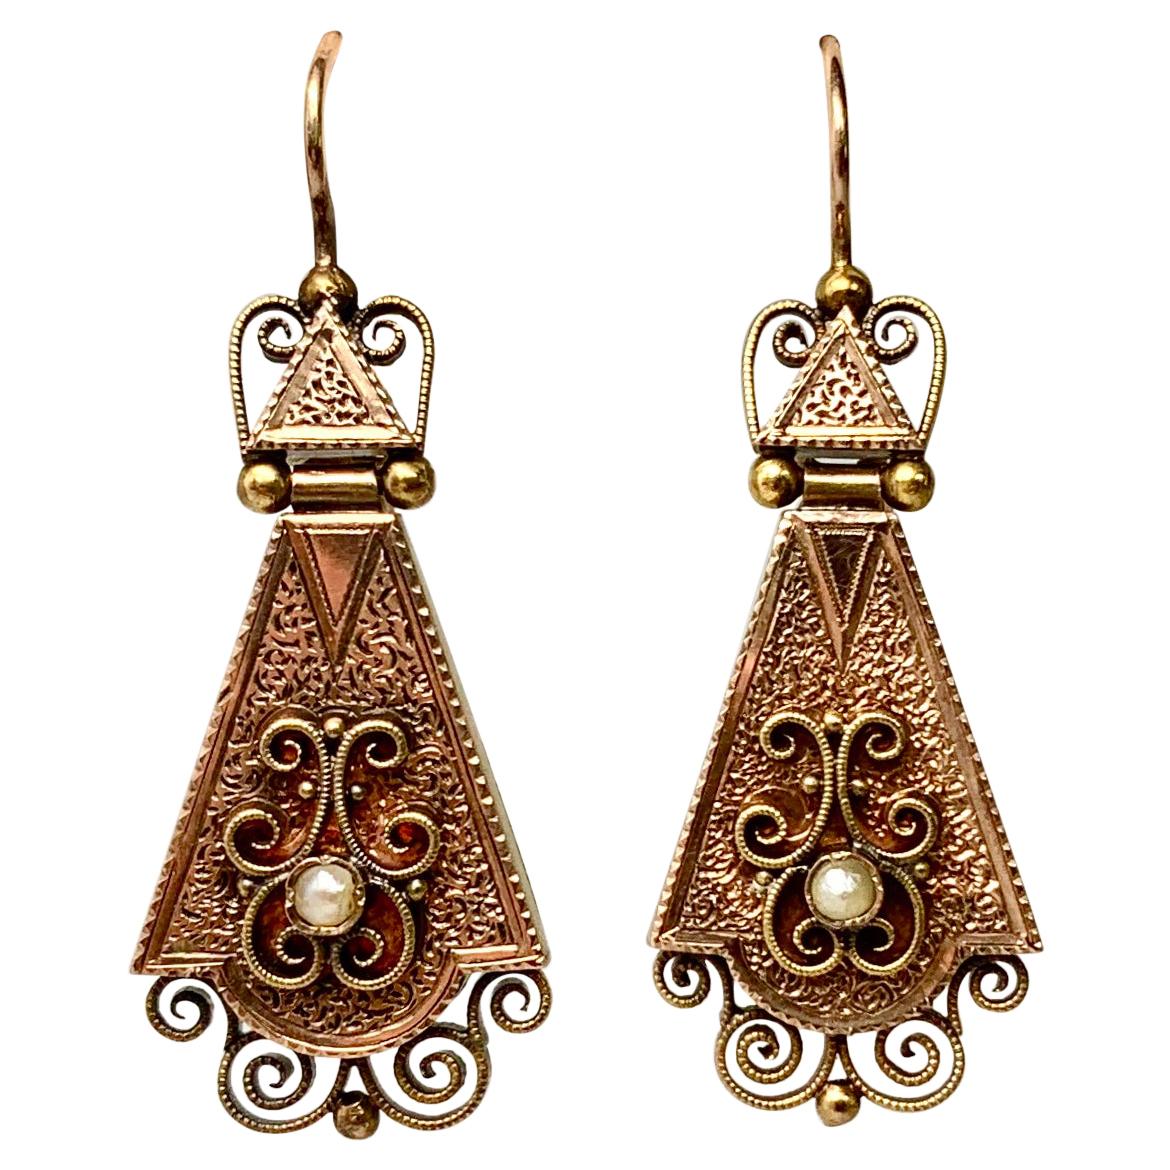 Victorian Gold Pendant Earrings Articulated Etruscan Revival 14 Karat Filigree For Sale